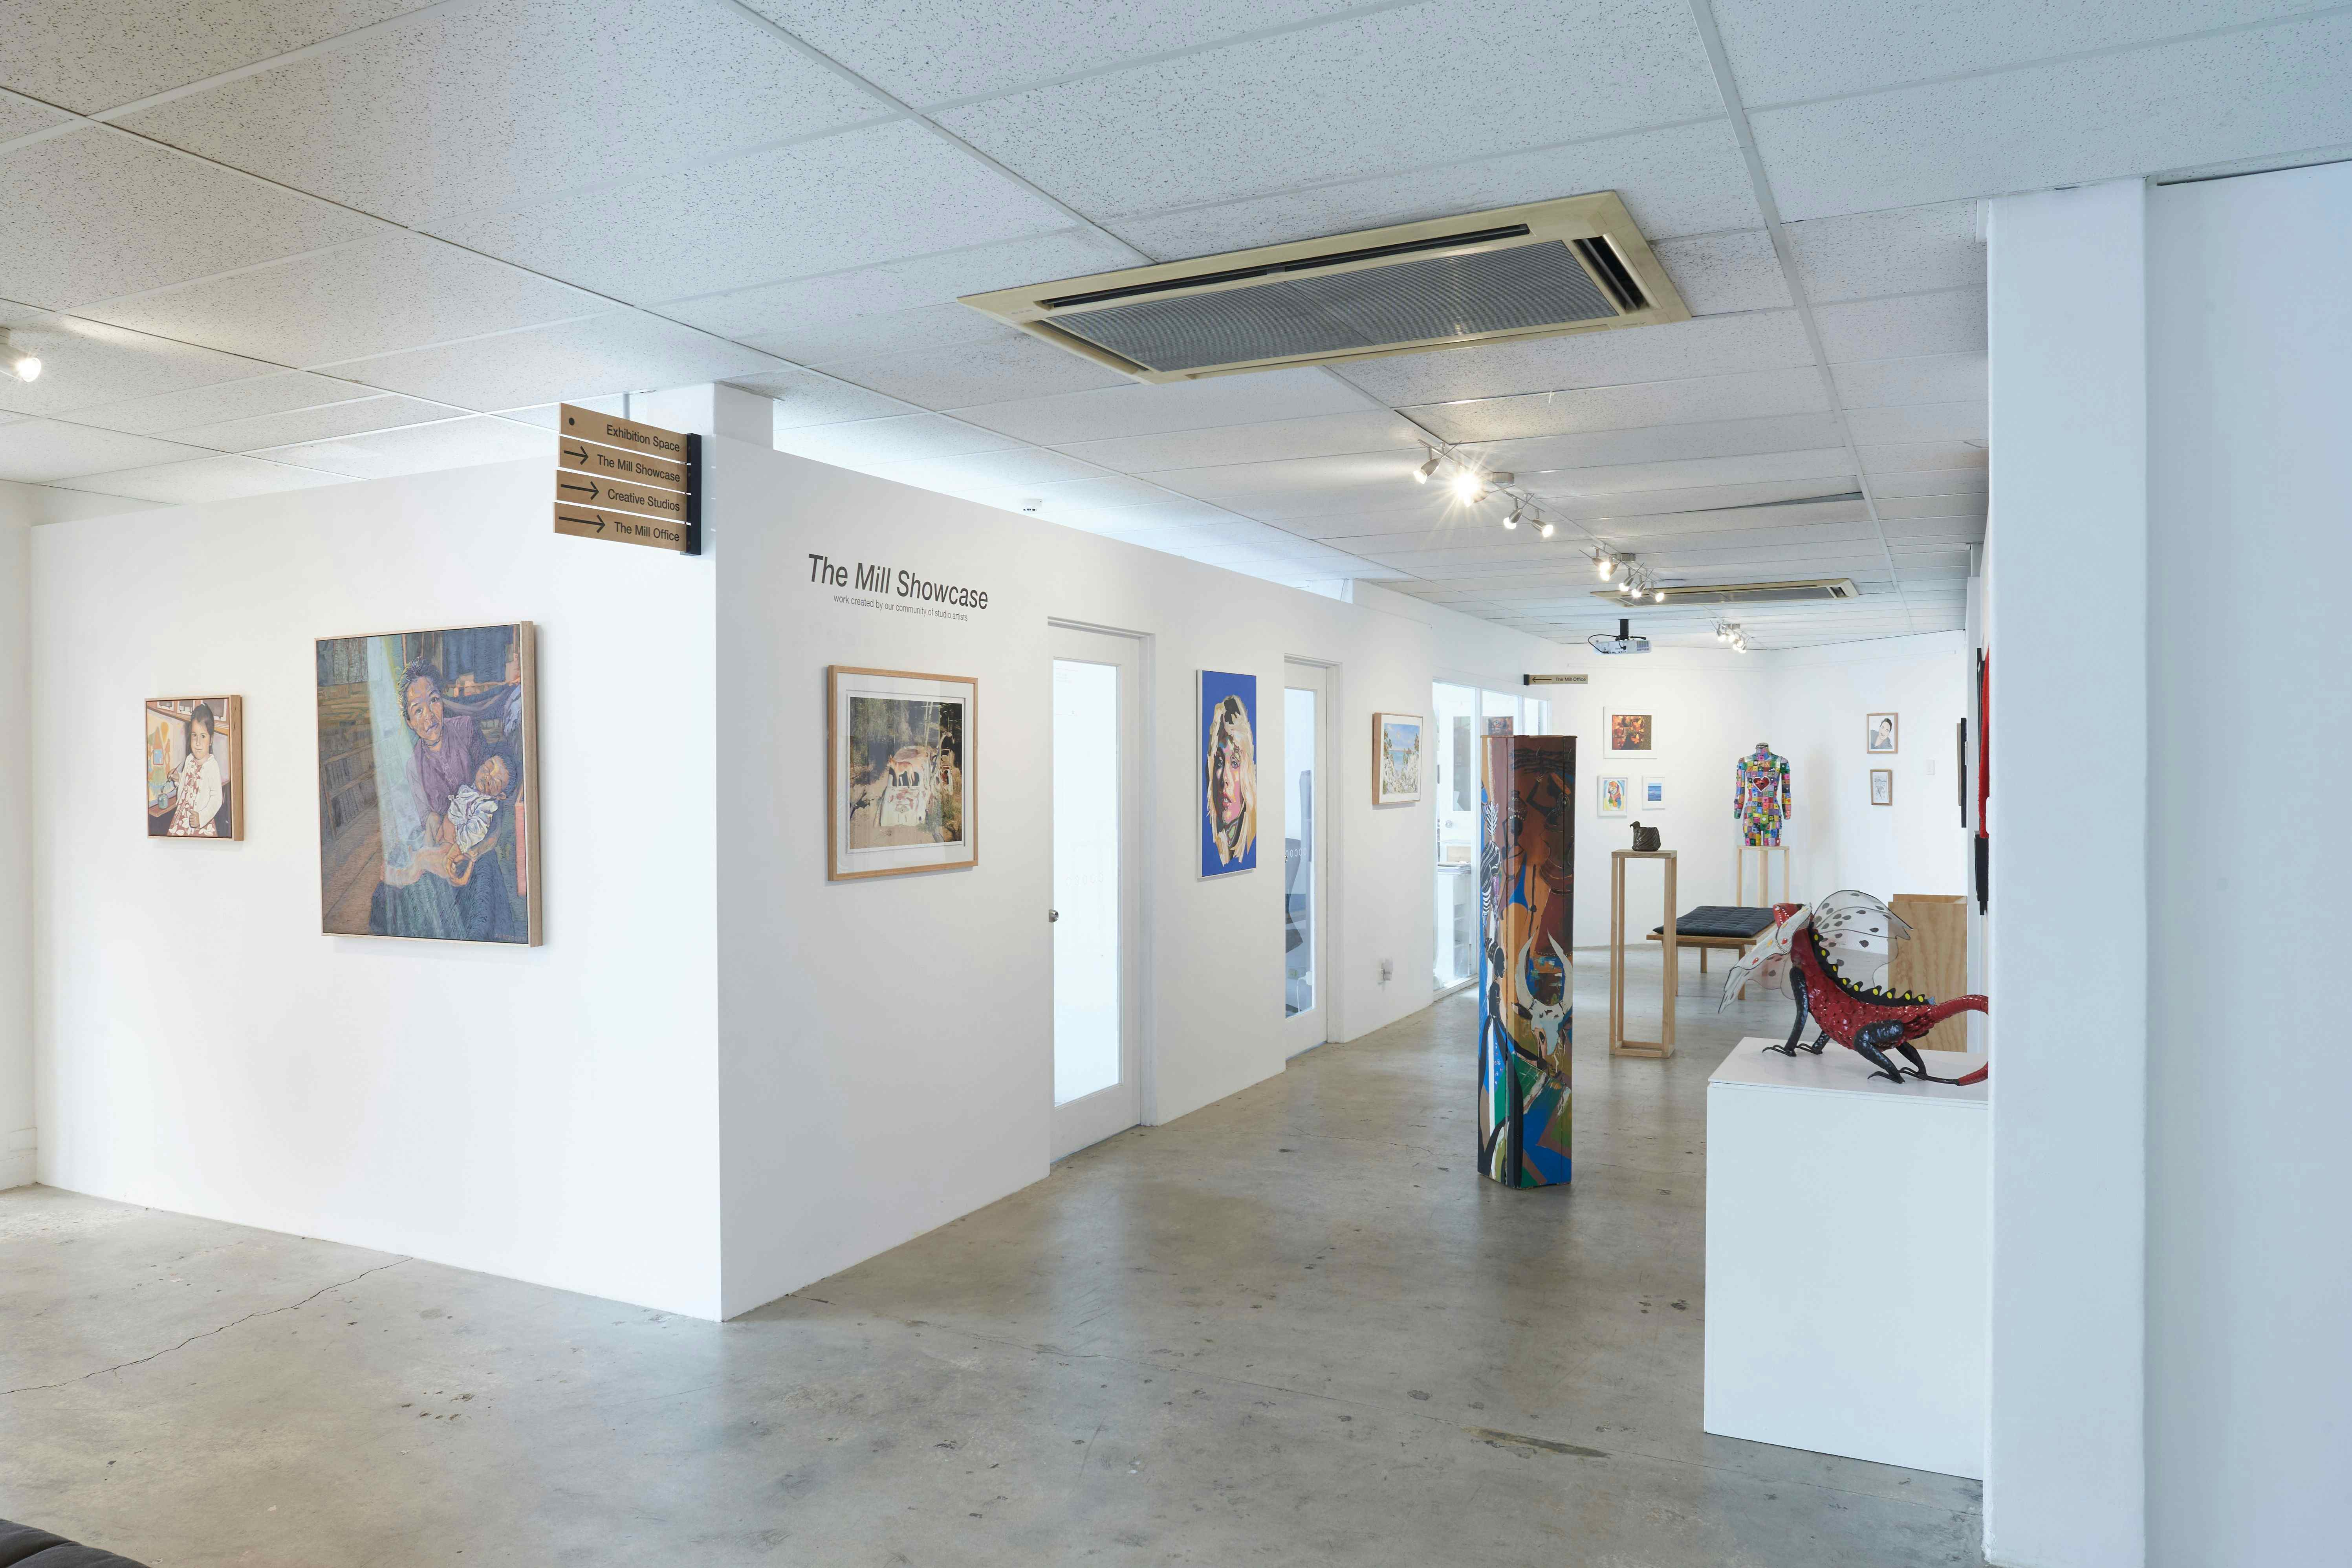 The Exhibition Space, The Mill